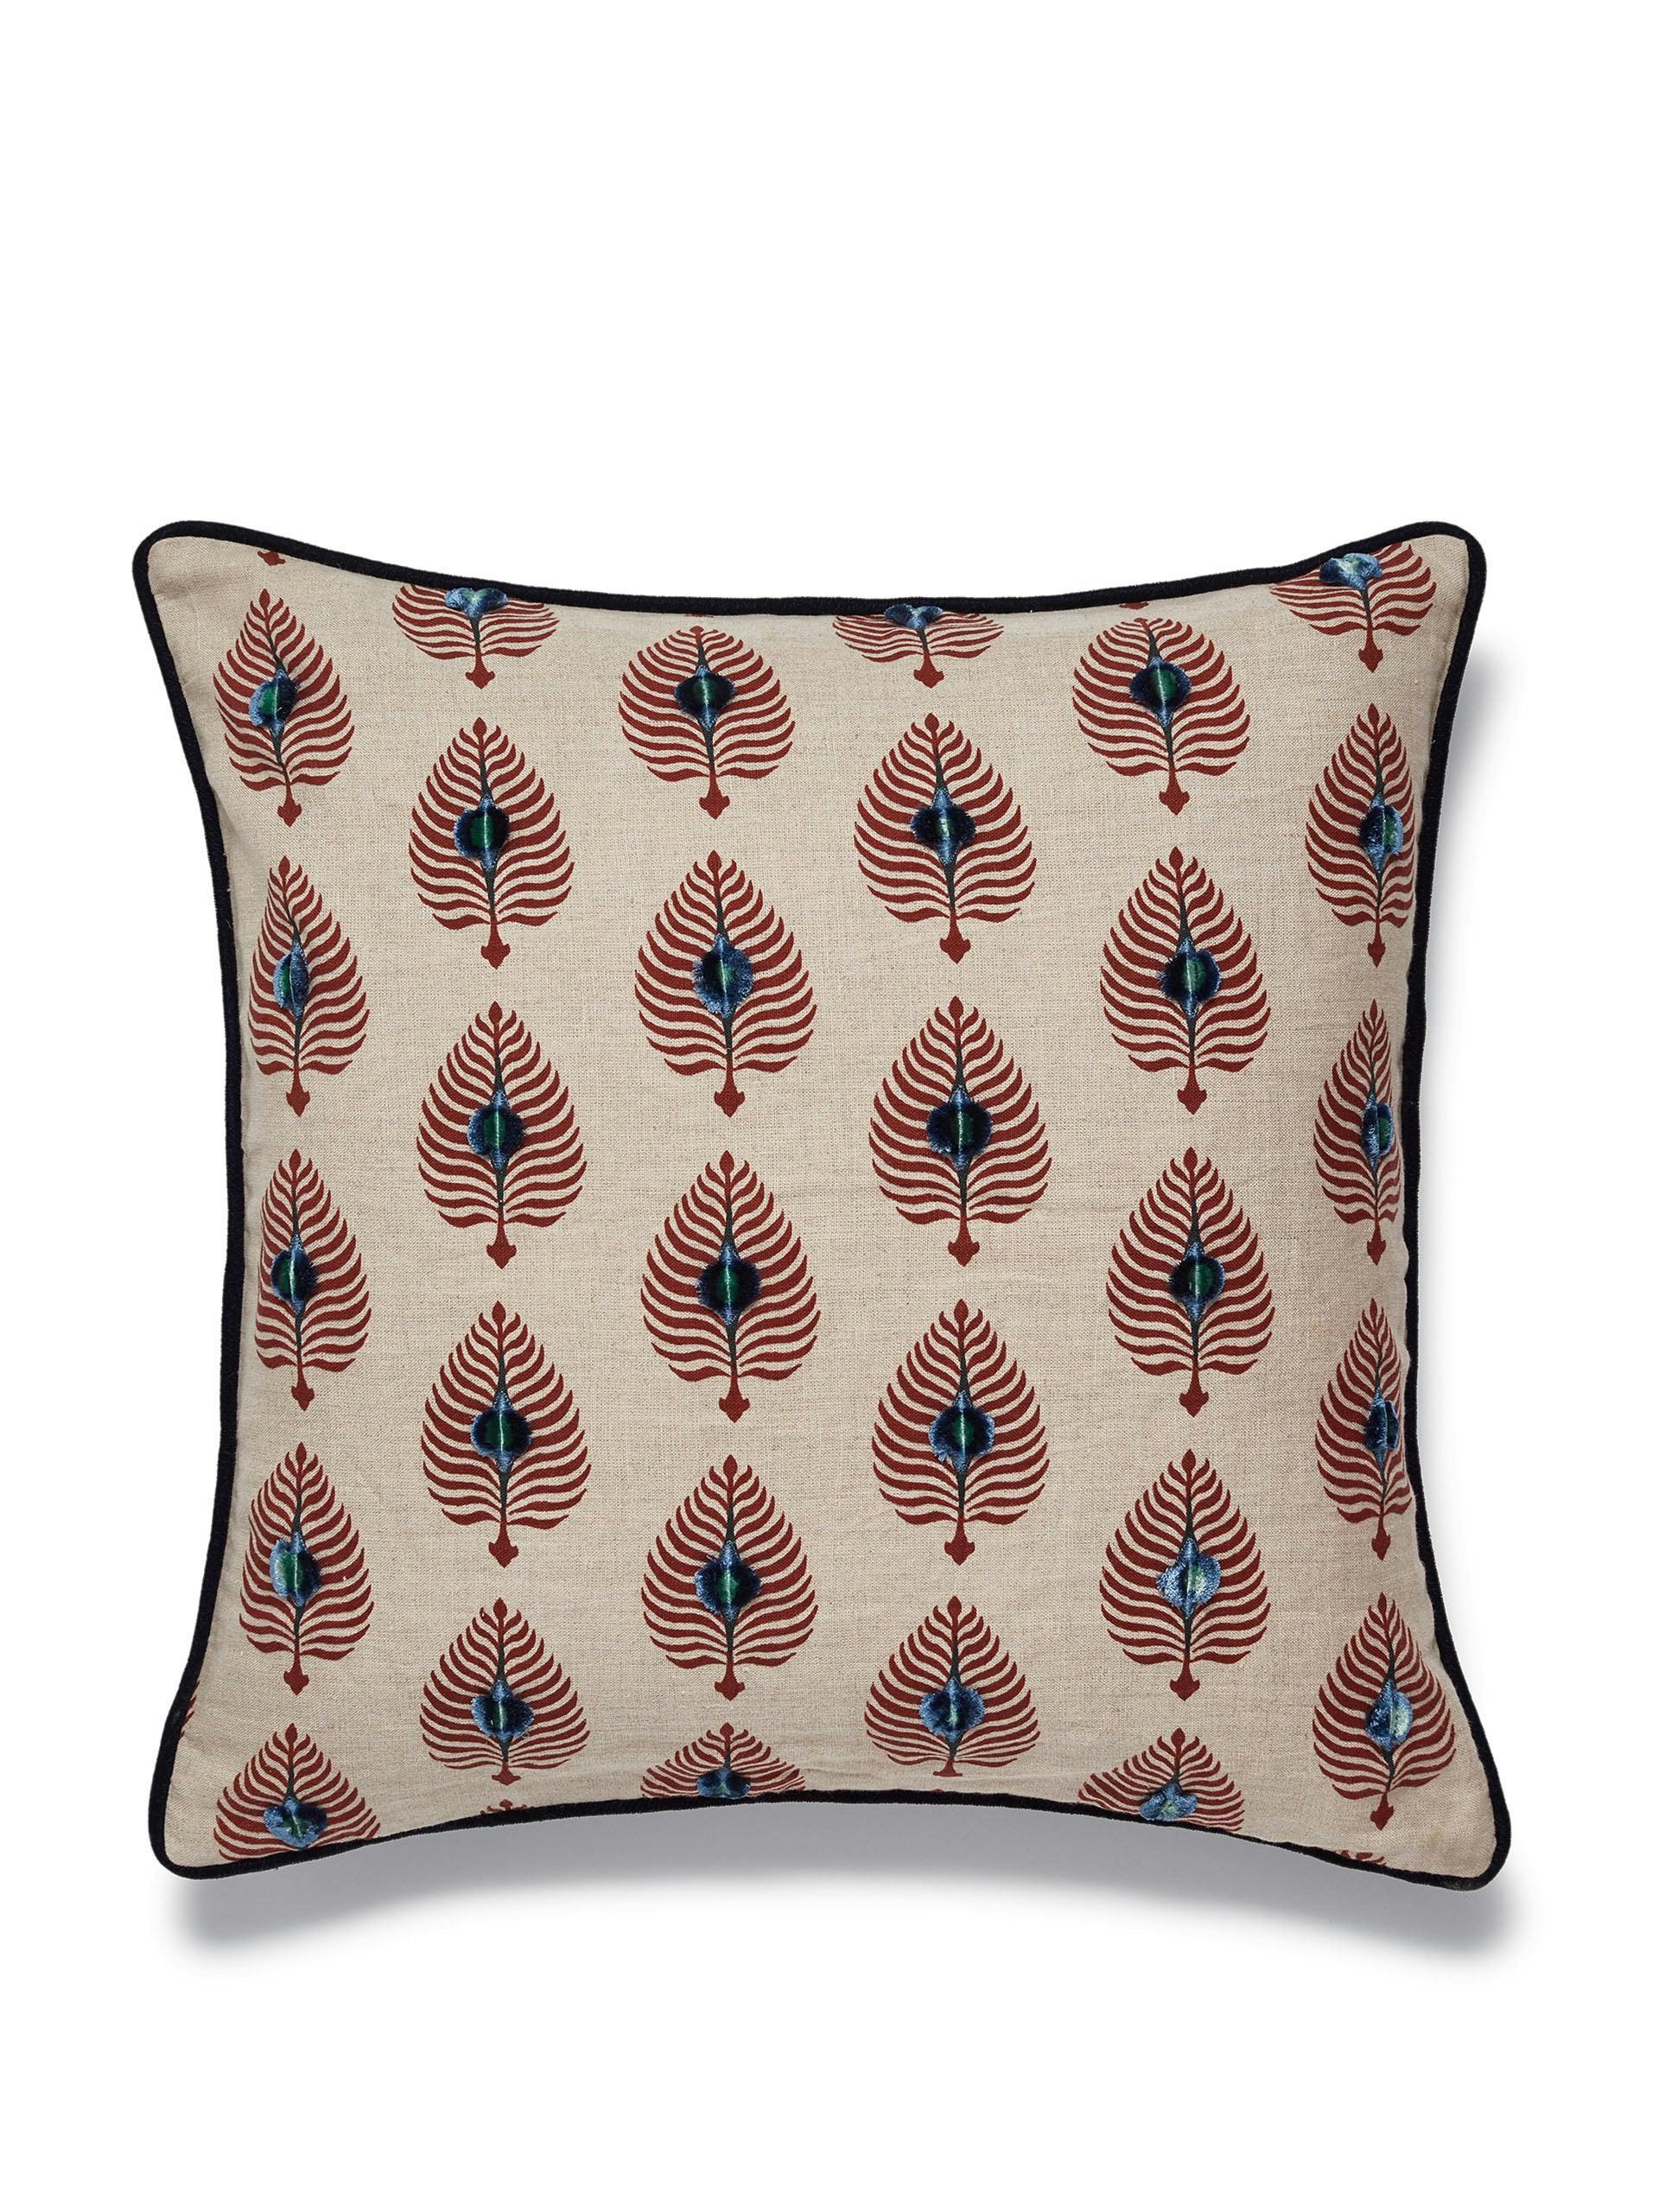 Ocellus red and navy cushion cover